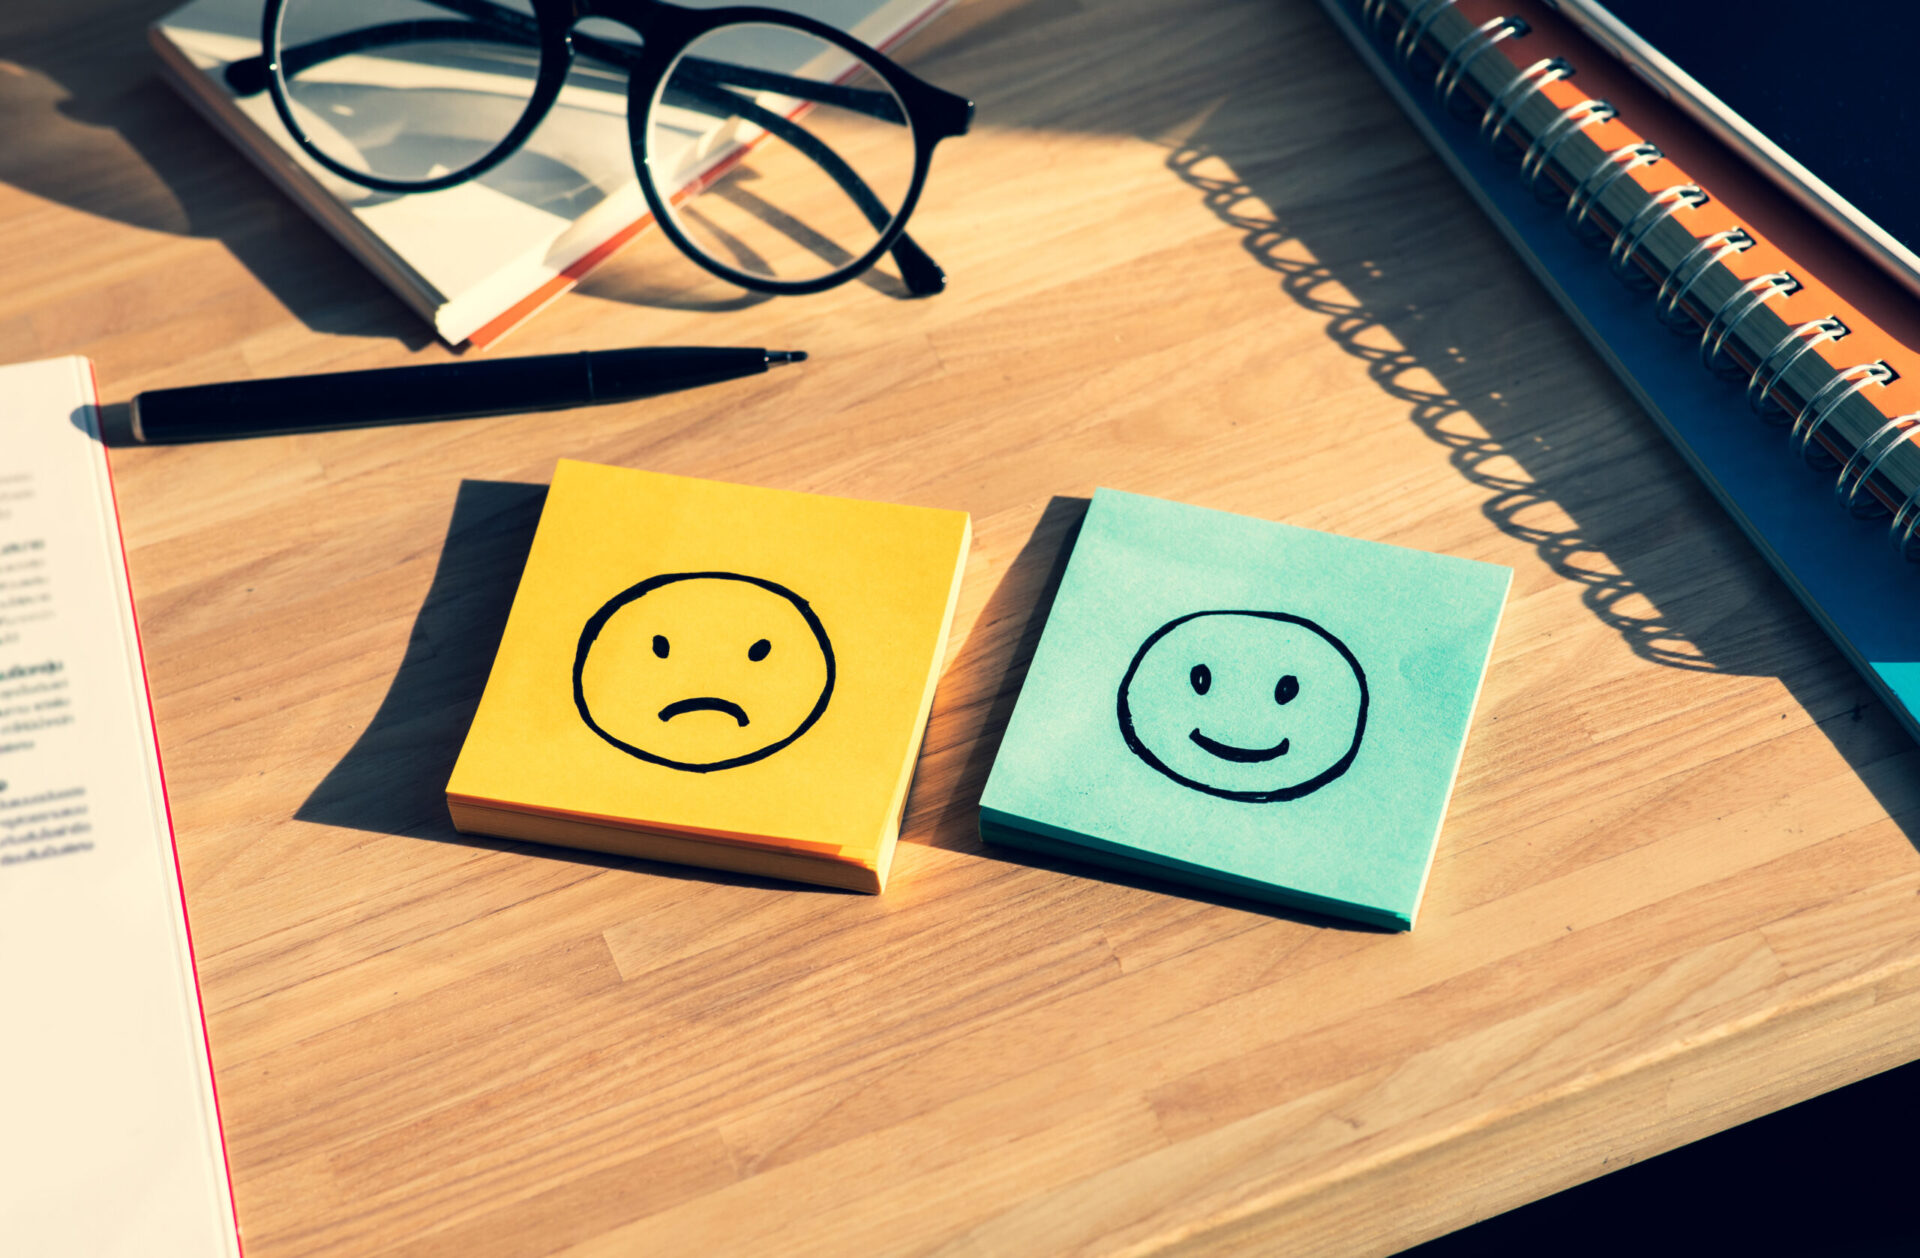 Photo of a post-it-note with a sad face and one with a happy face